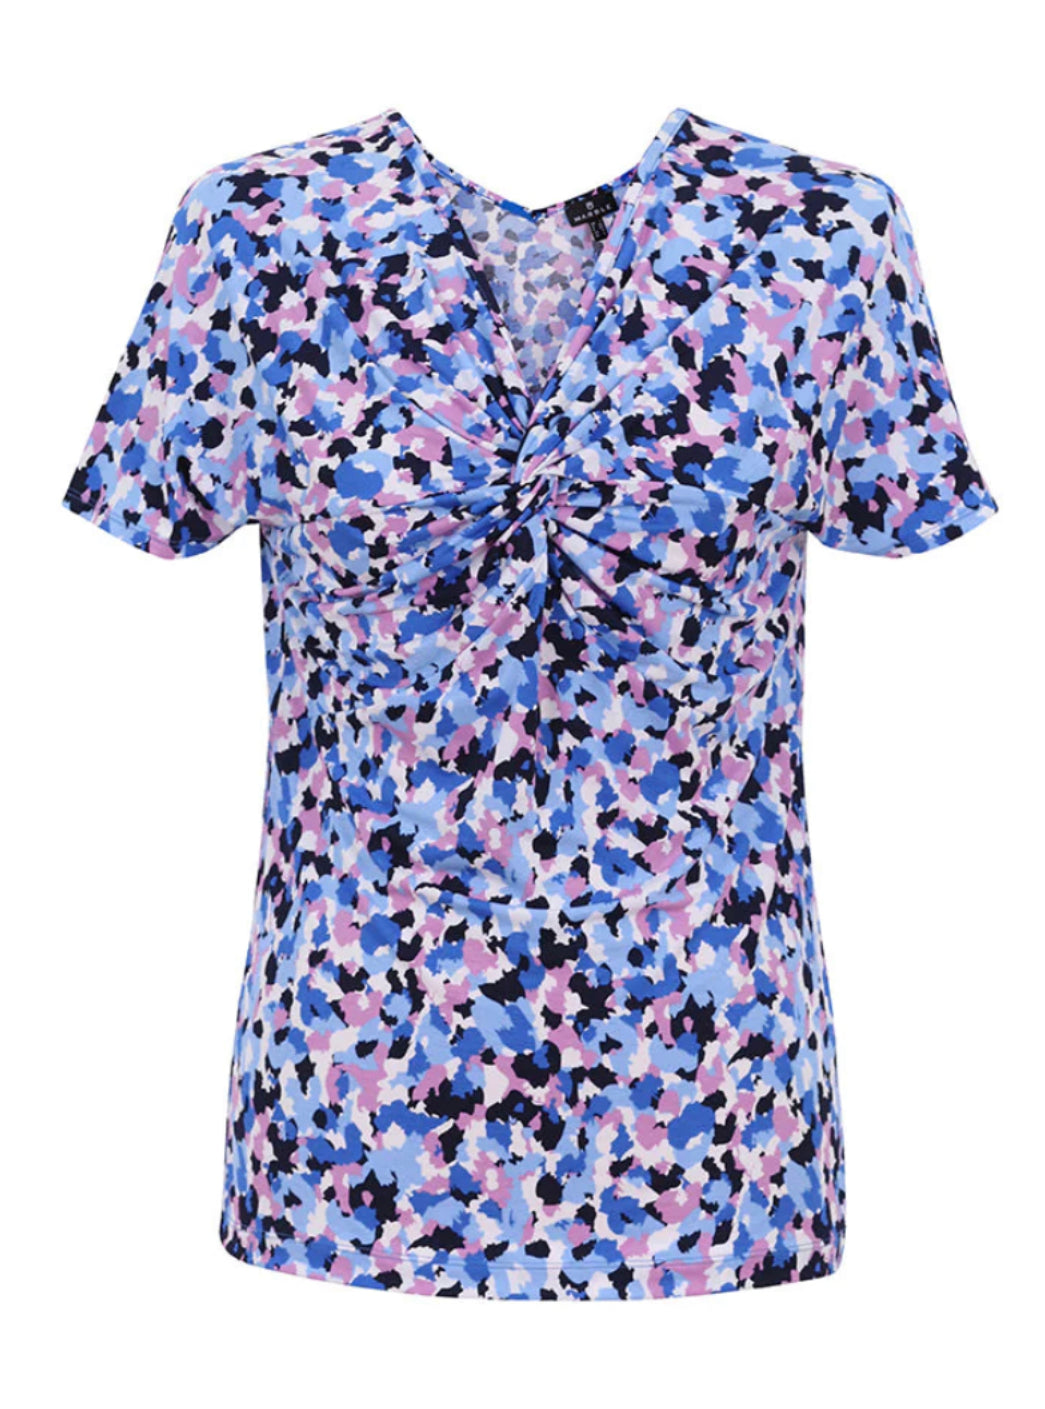 Marble 6979 Blue Multi Print Short Sleeved Twist Front Top